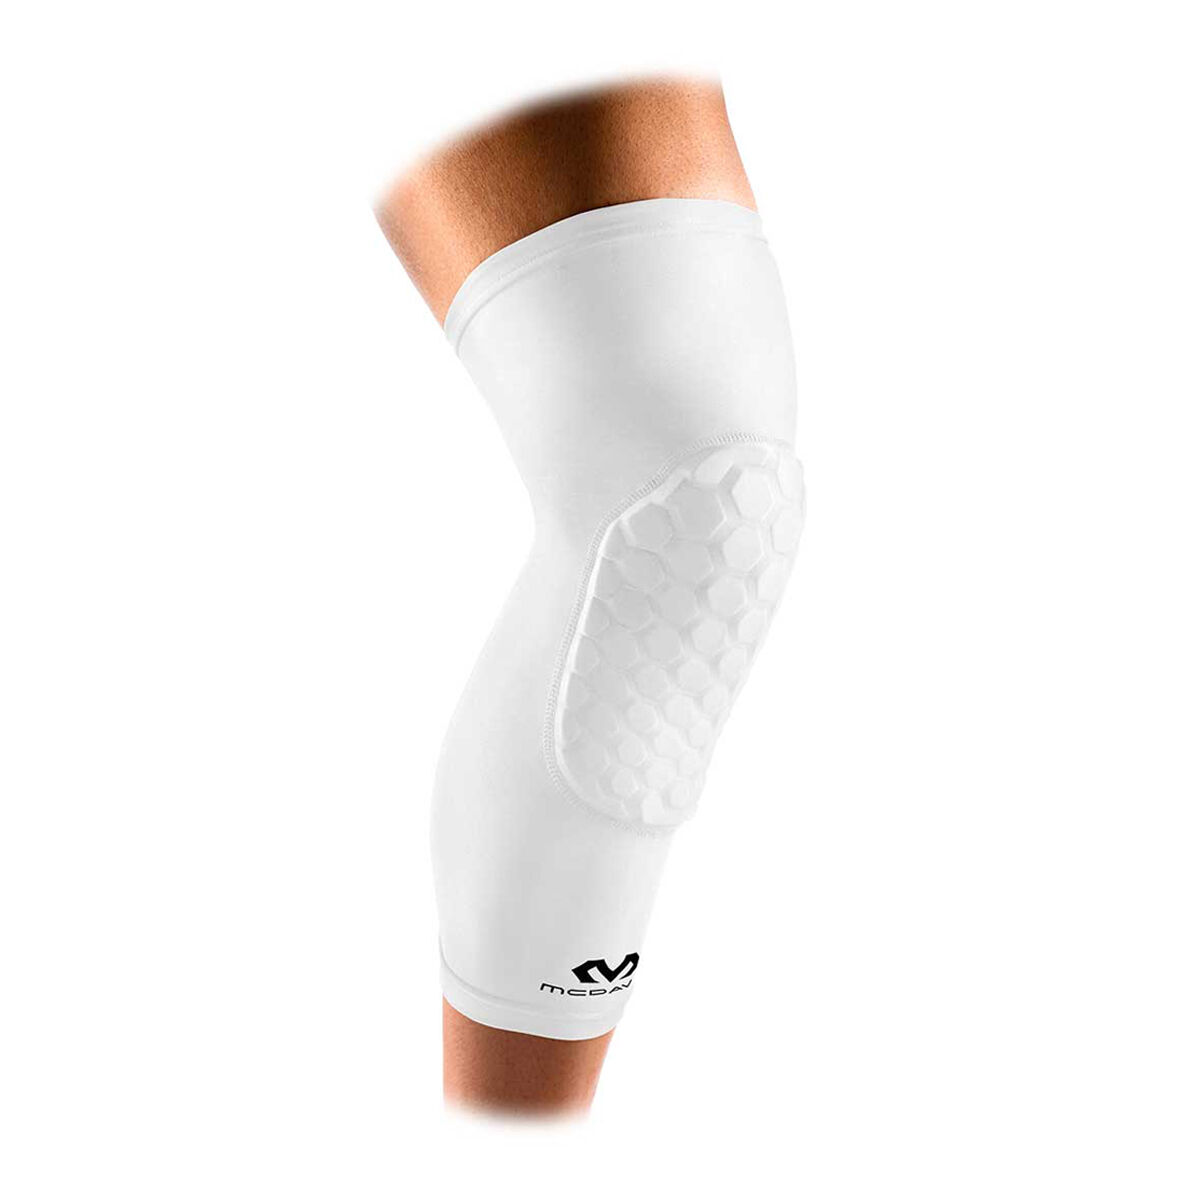  Basketball Knee Pads Compression Leg Sleeves For Volleyball  Football Weightlifting White S